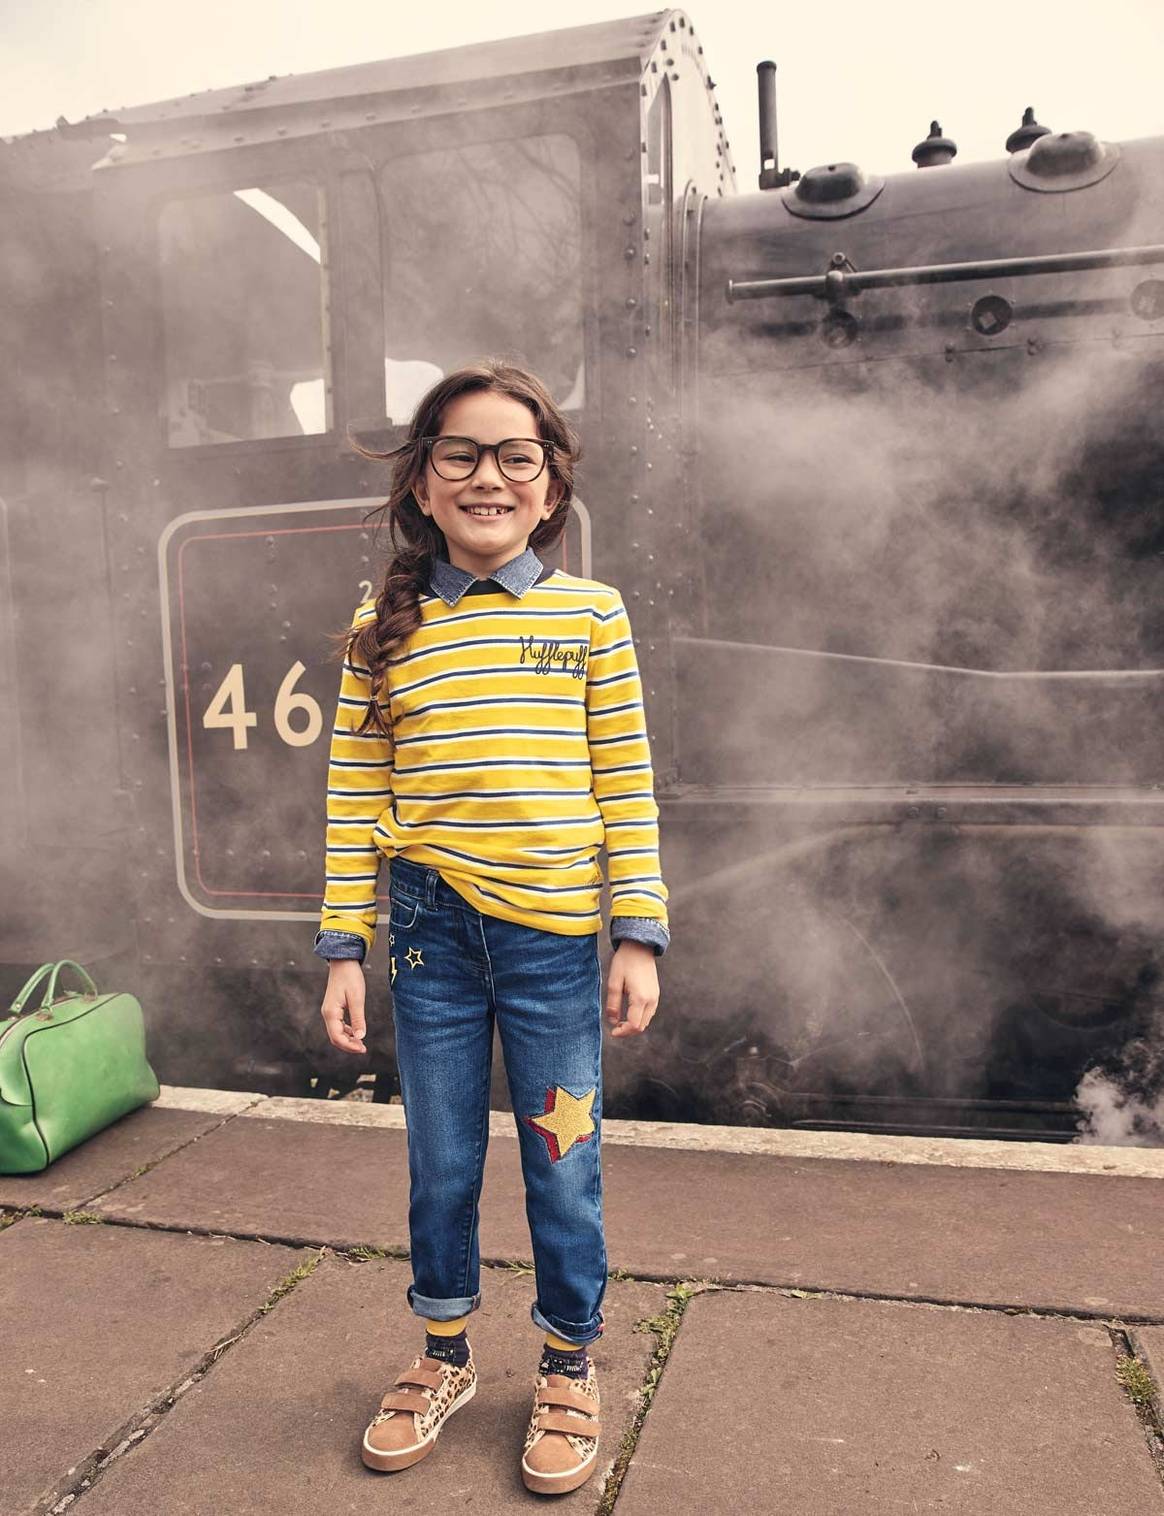 Mini Boden x Harry Potter: the magical childrenswear collection